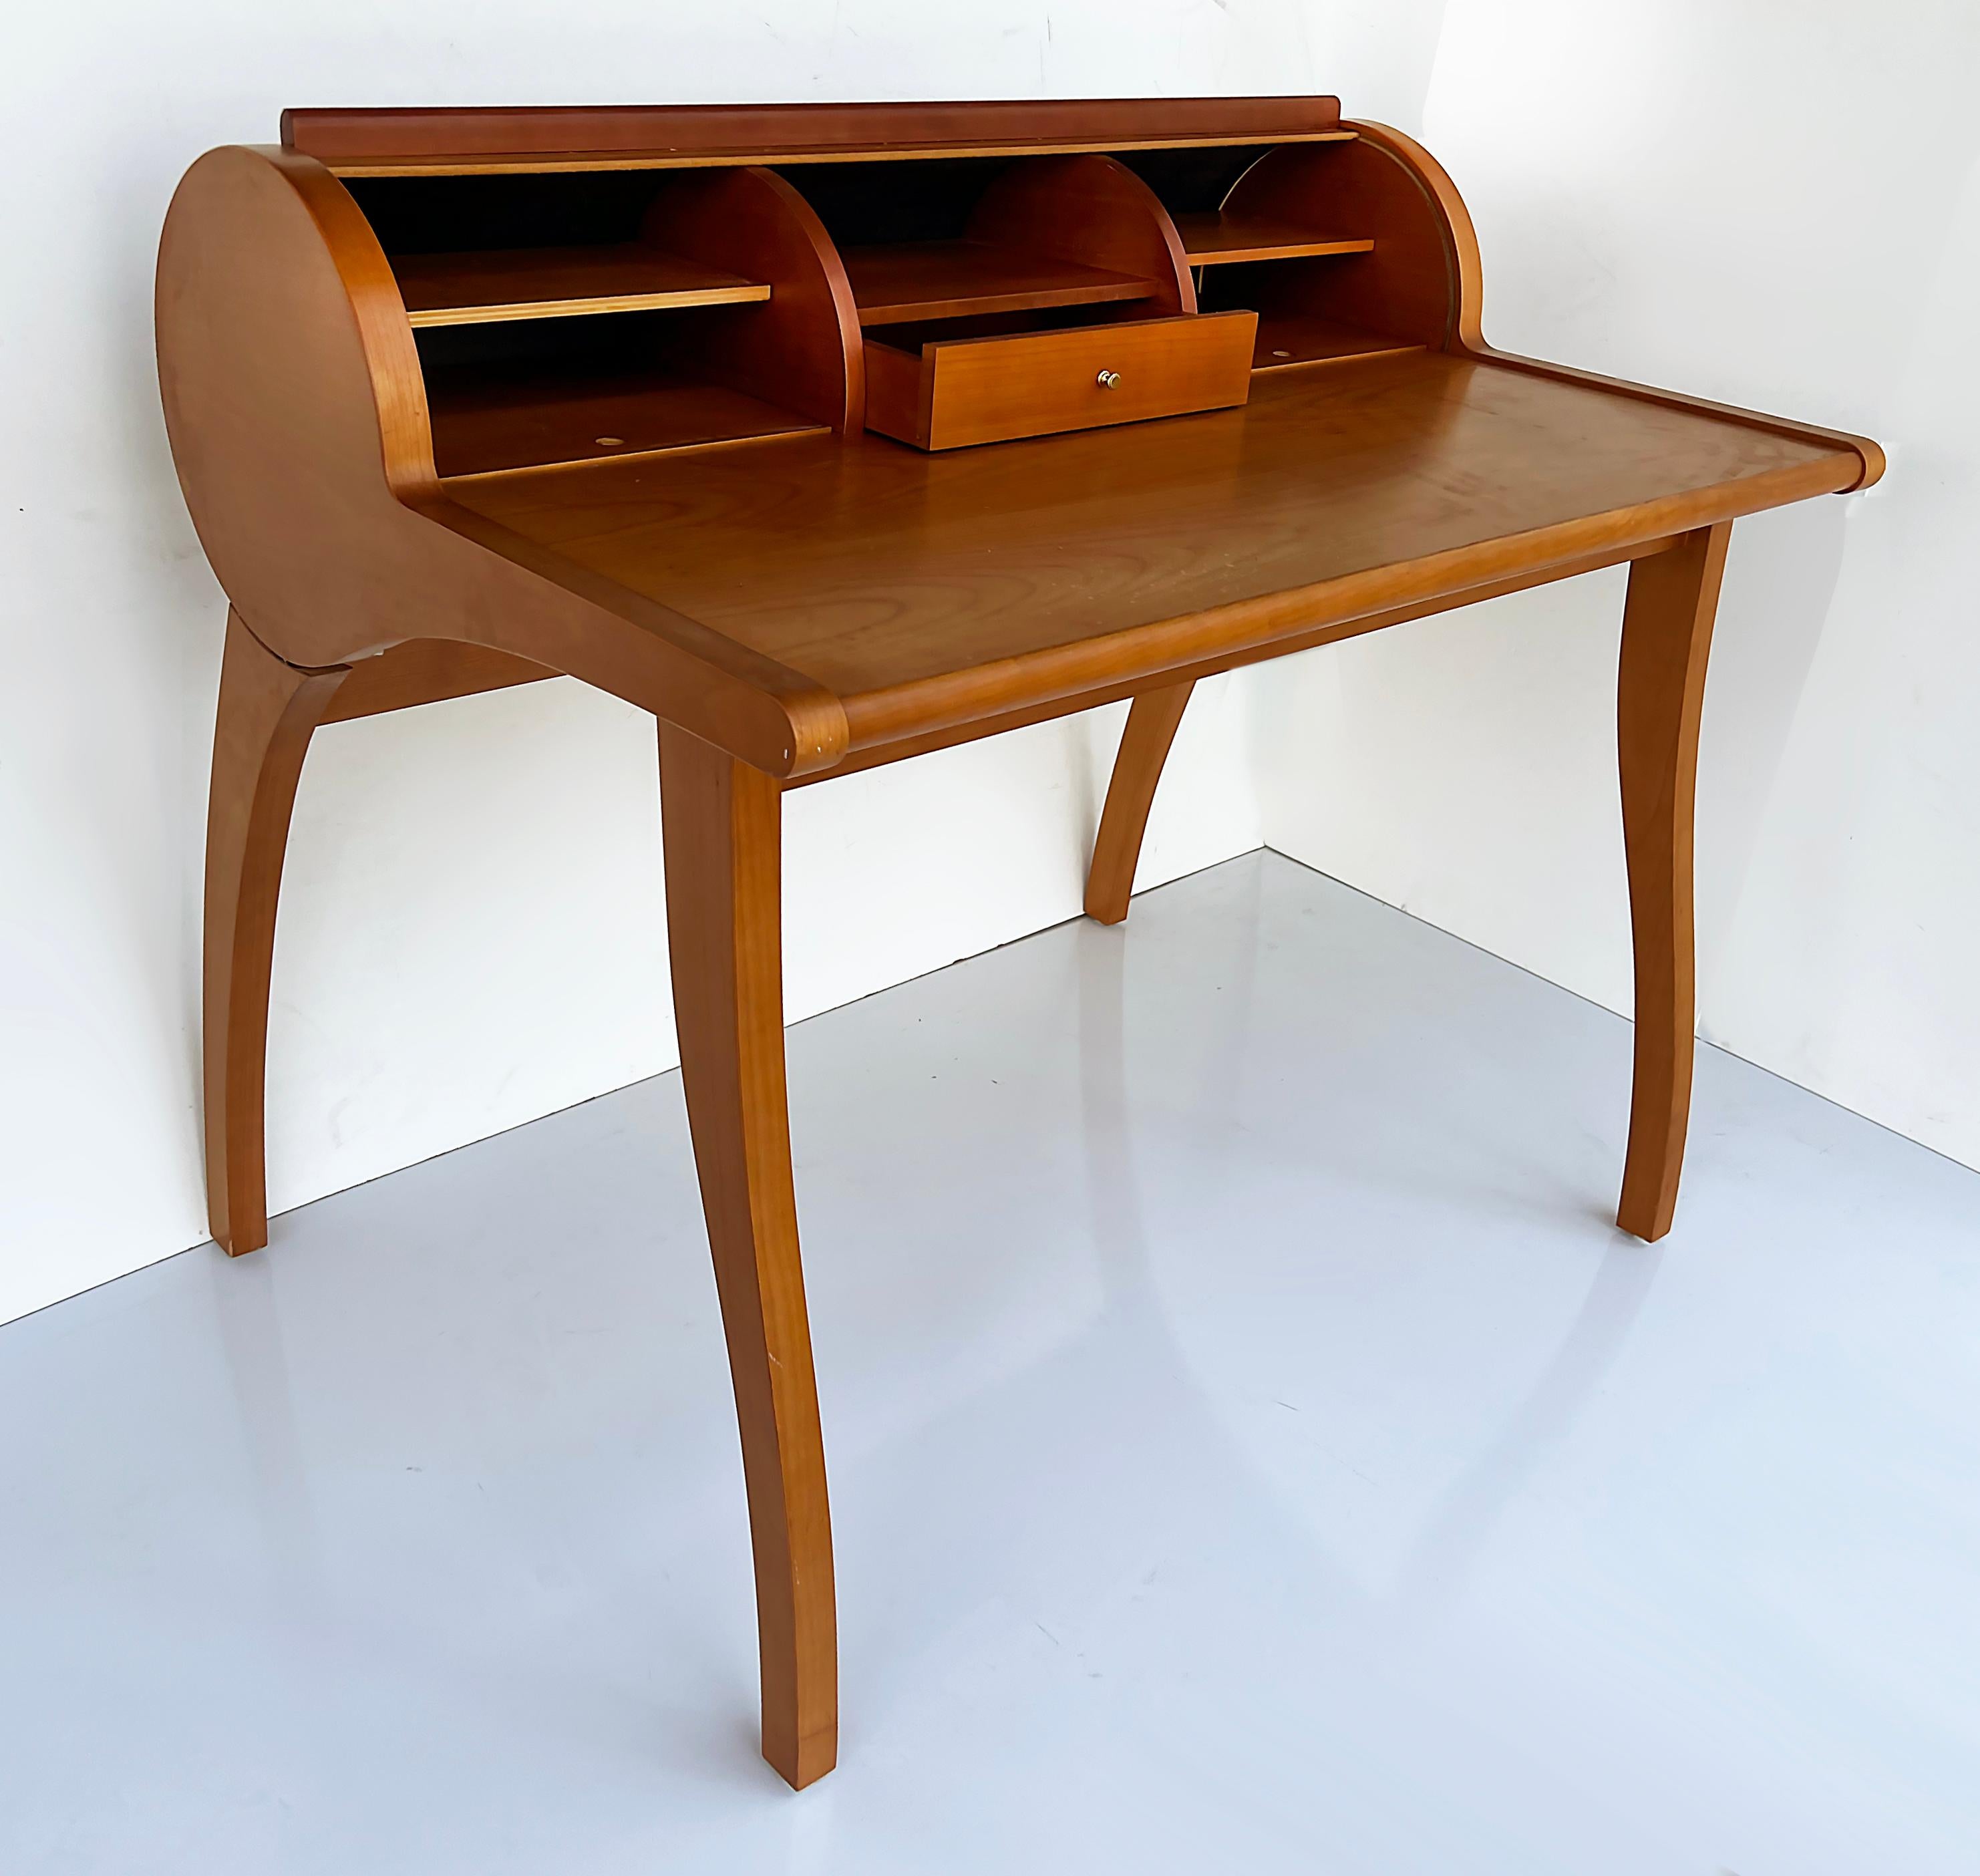 Mid-Century Danish Modern sculptural teak roll-top desk

Offered for sale is a Mid-century Danish Modern roll-top desk created with a great sculptural form. The small desk has a drawer and two hidden compartments with cubby-hole storage as well as